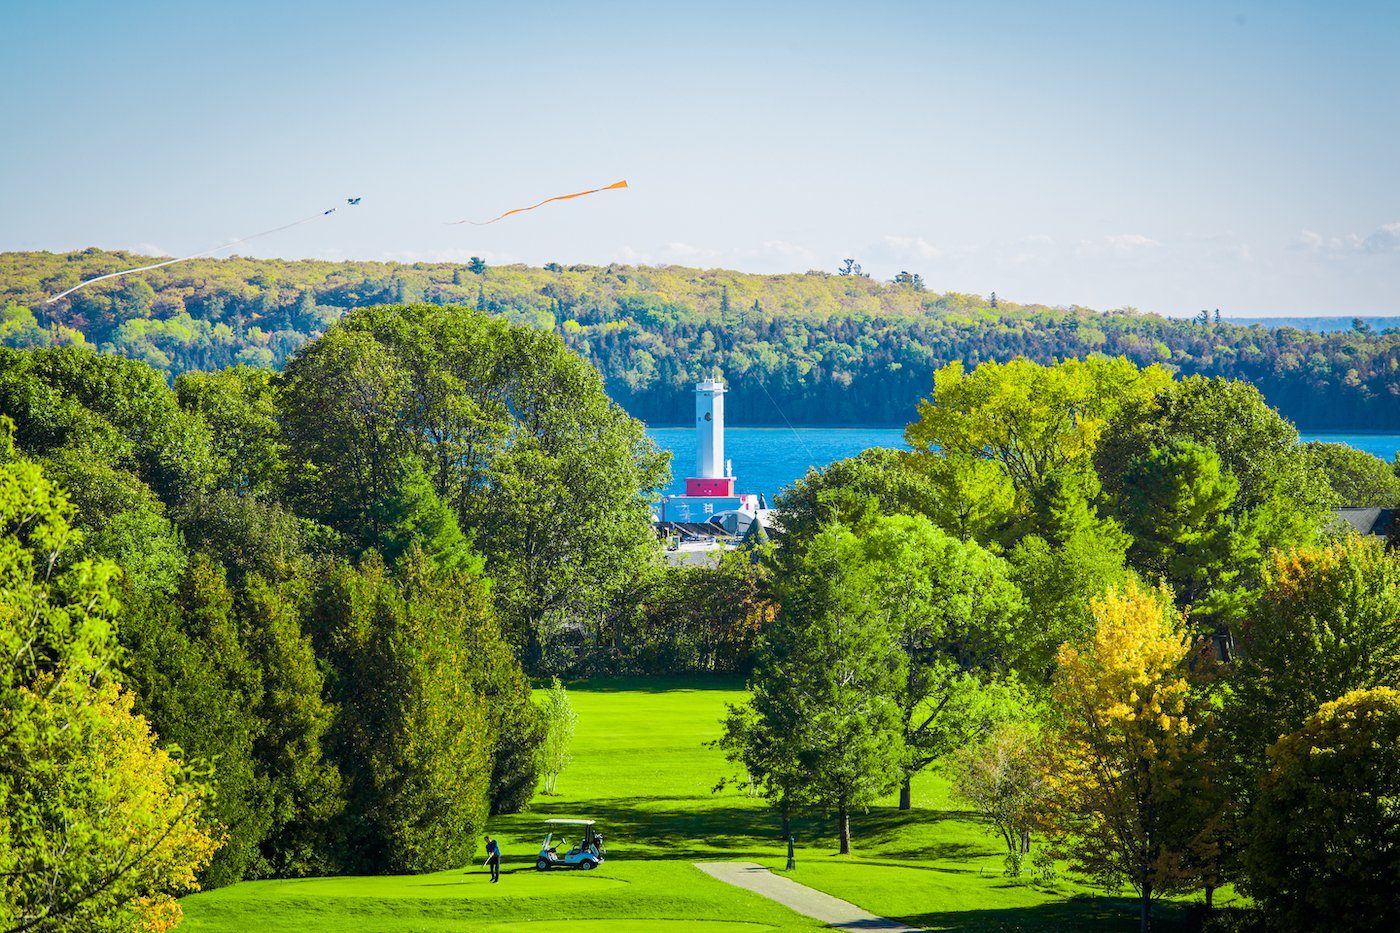 Round Island Lighthouse rises out of the water behind the trees on The Jewel Golf Course at Grand Hotel on Mackinac Island